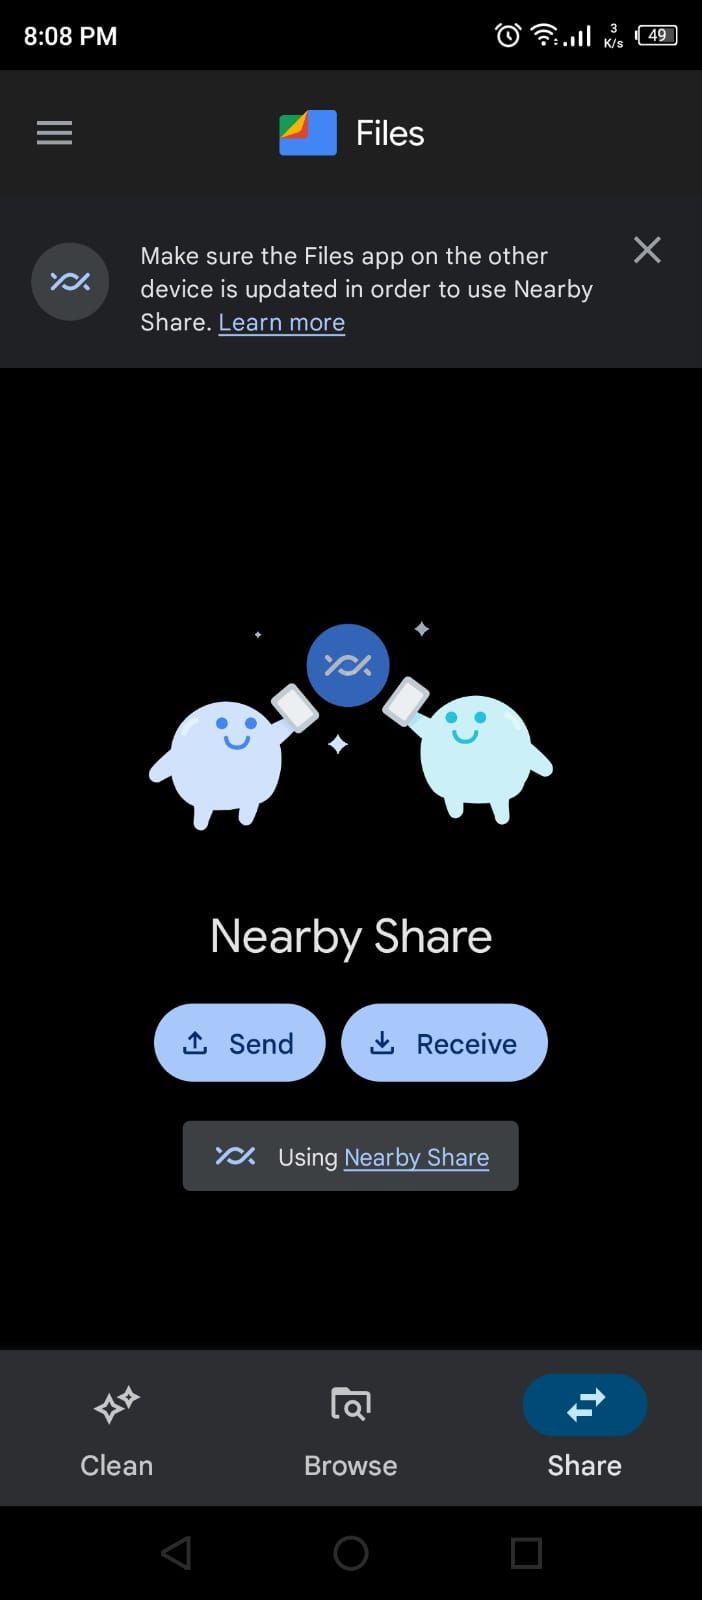 Sharing Files Through Nearby Share in Files by Google